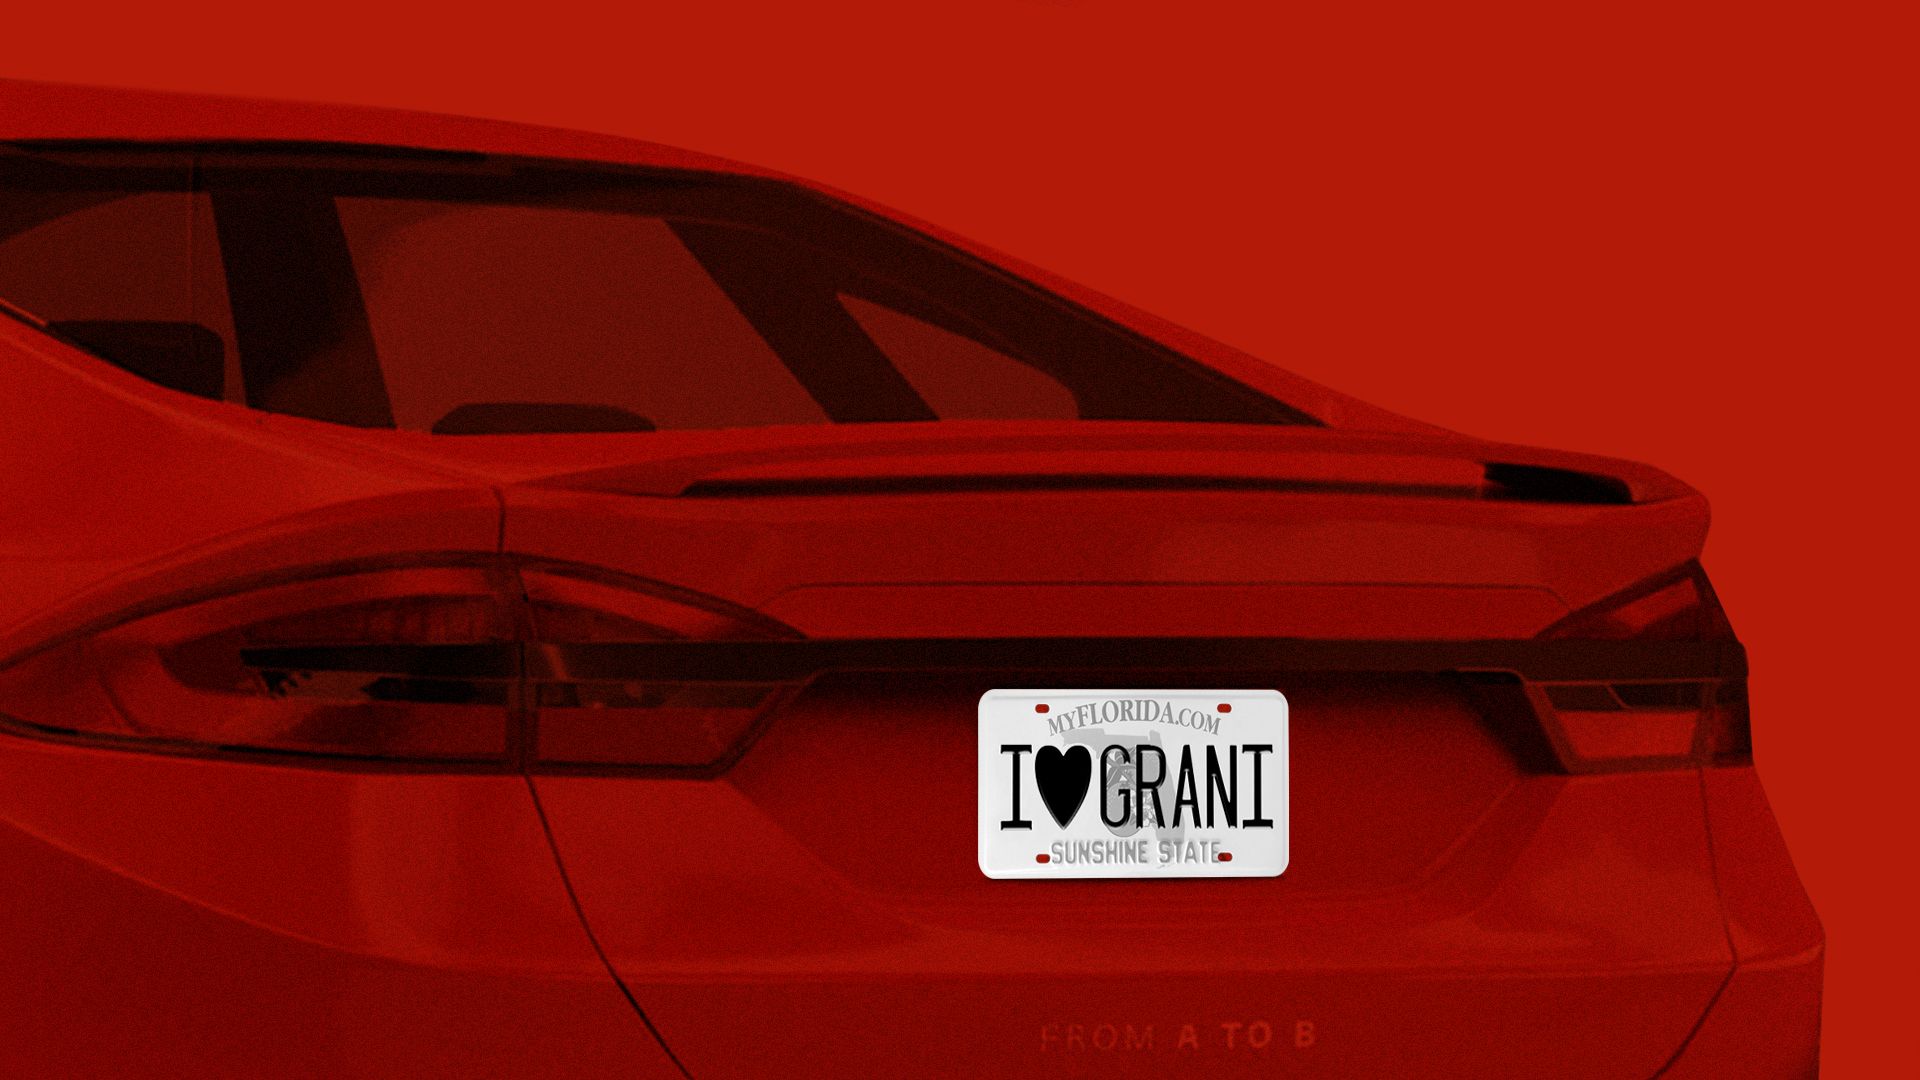 Illustration of Voyager taxi with vanity plate that says "I (heart) GRANI"